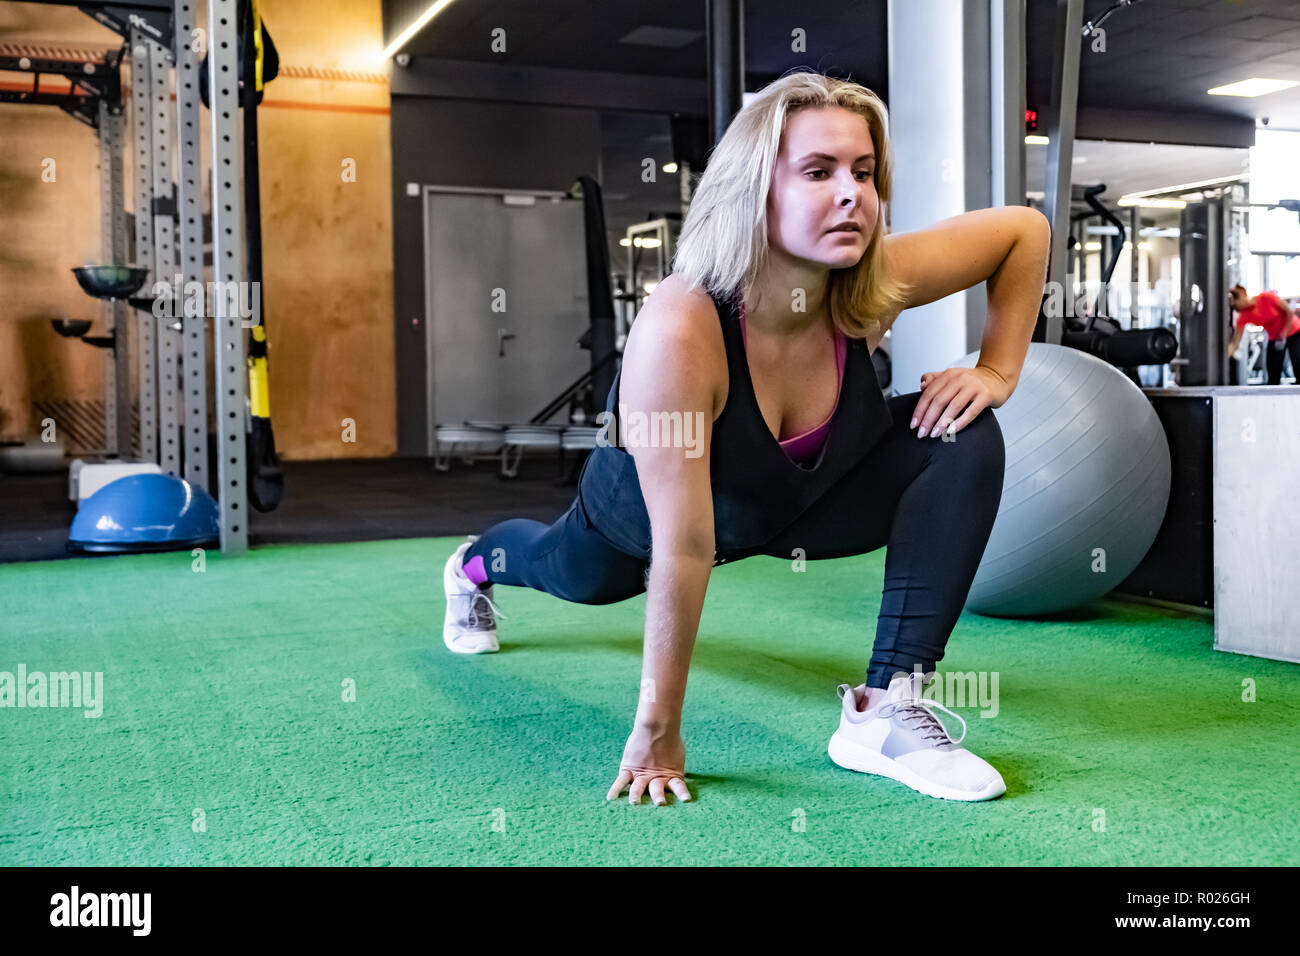 Young fit woman at the gym doing stationary lunge exercise. Female athlete at a fitness room working out on walking lunge exercise Stock Photo